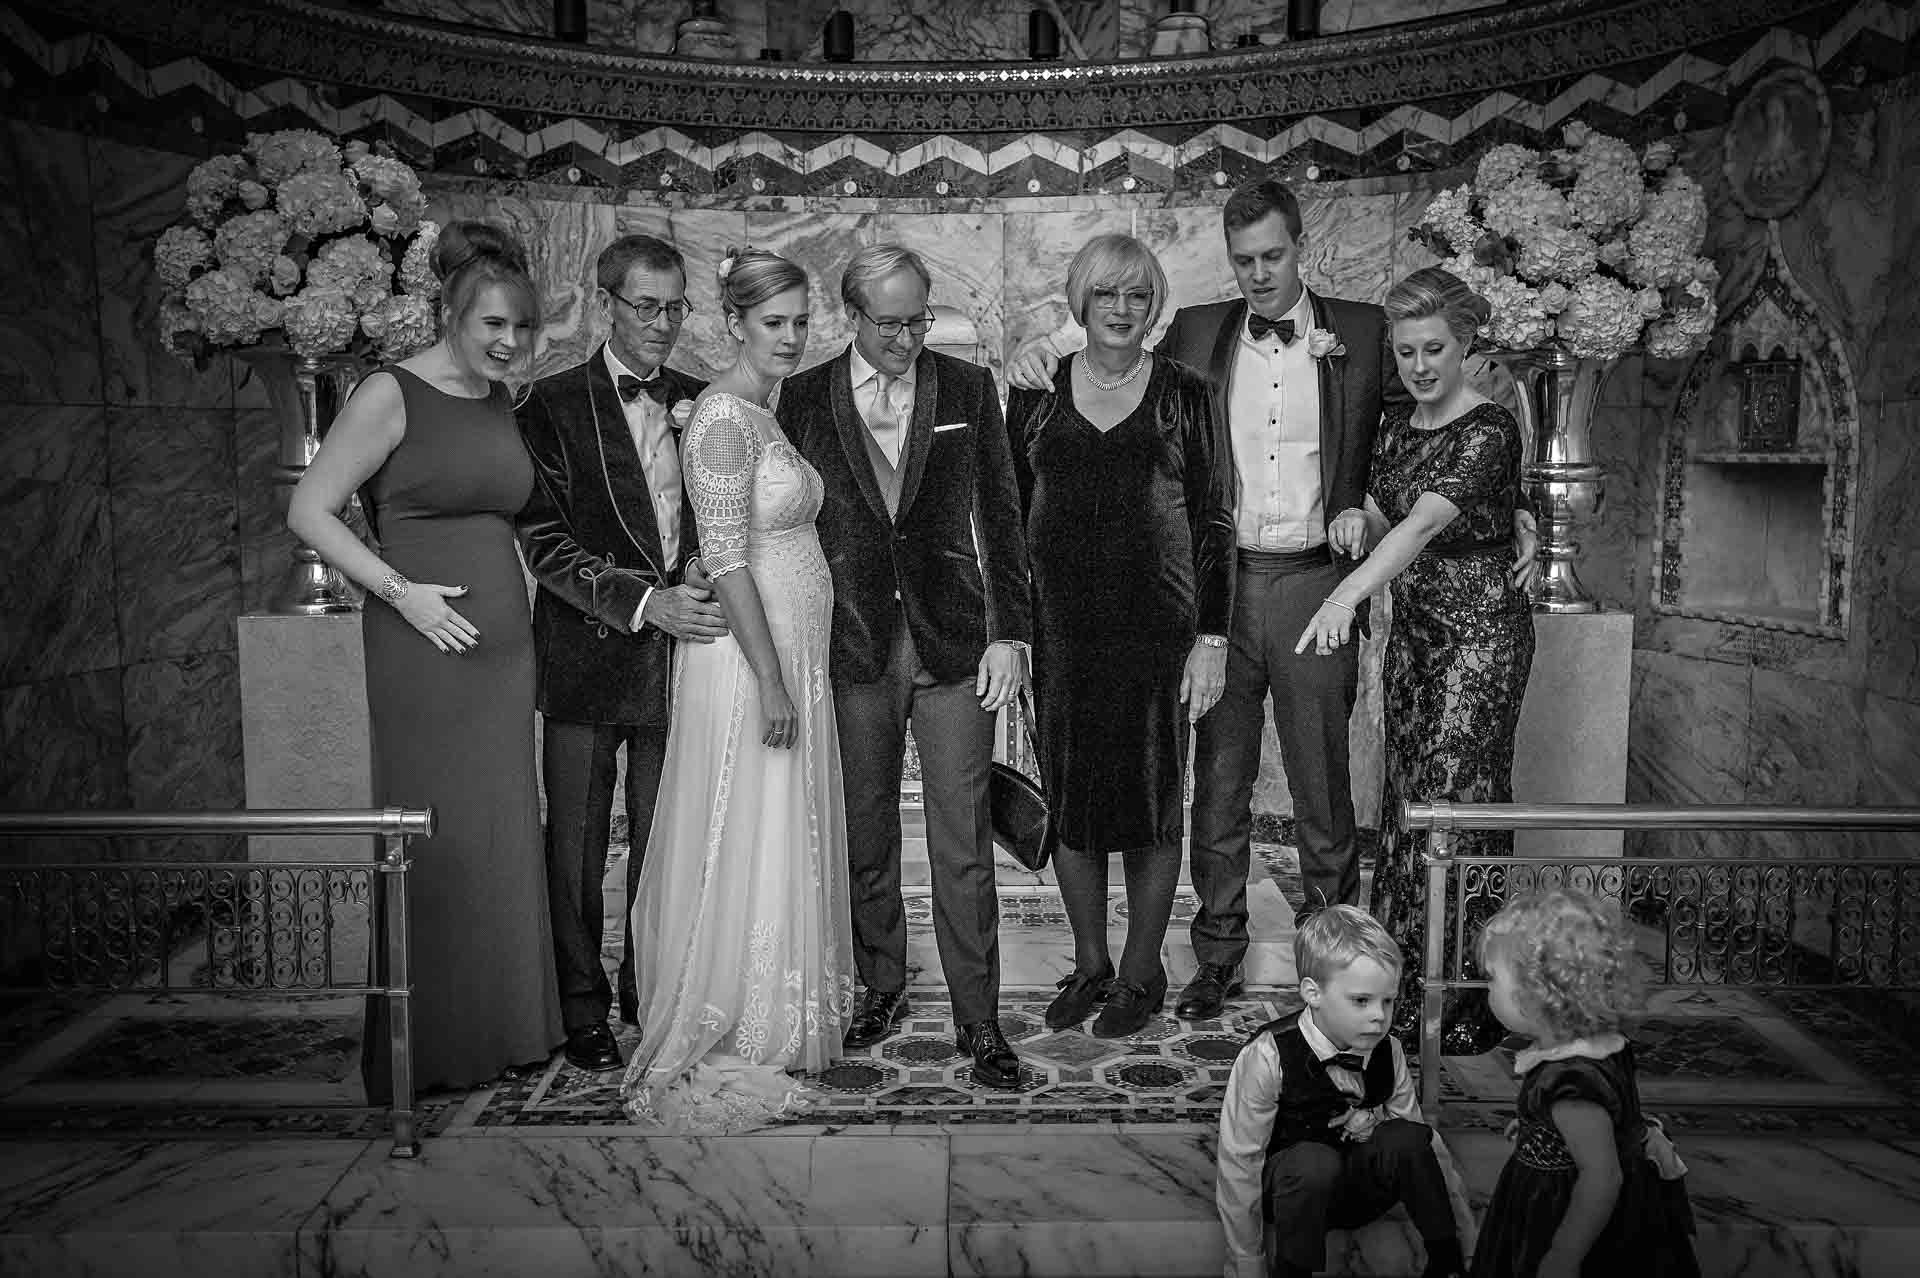 Group Wedding Photo Taken at the Fitzrovia Chapel with Two Children Unwilling to Take Part